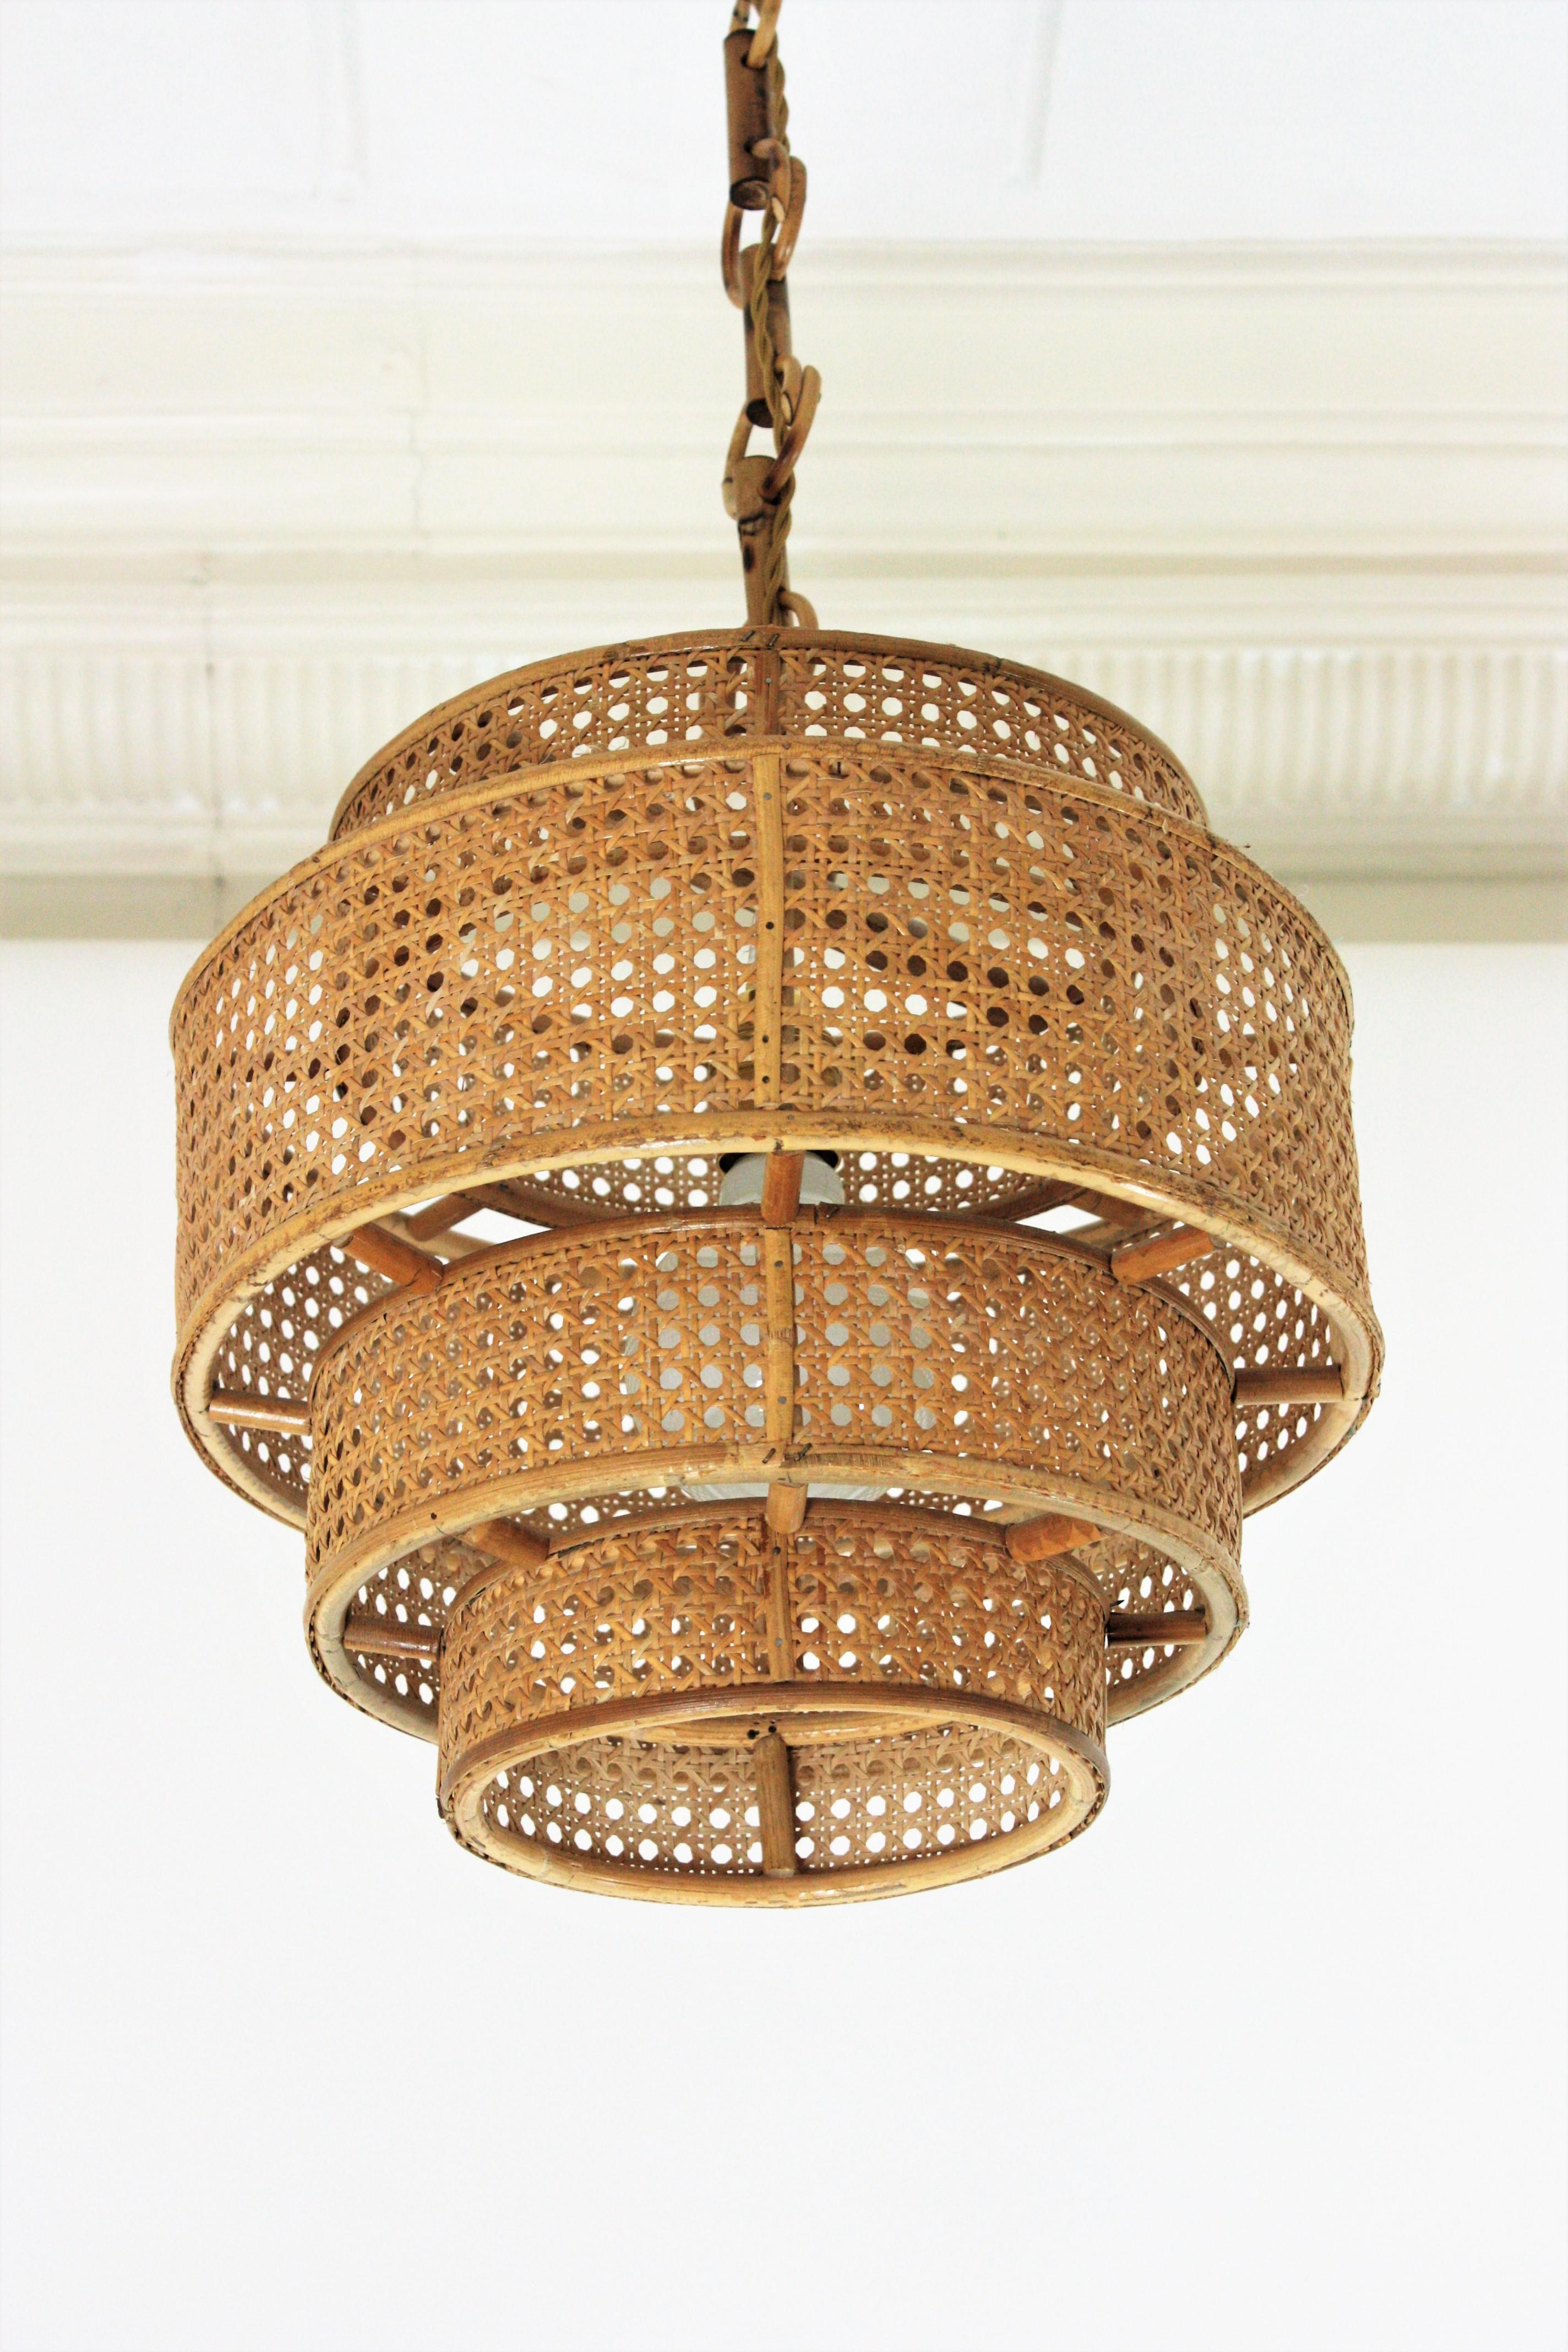  Rattan Wicker Weave Concentric Cylinder Pendant Hanging Light, 1960s For Sale 1